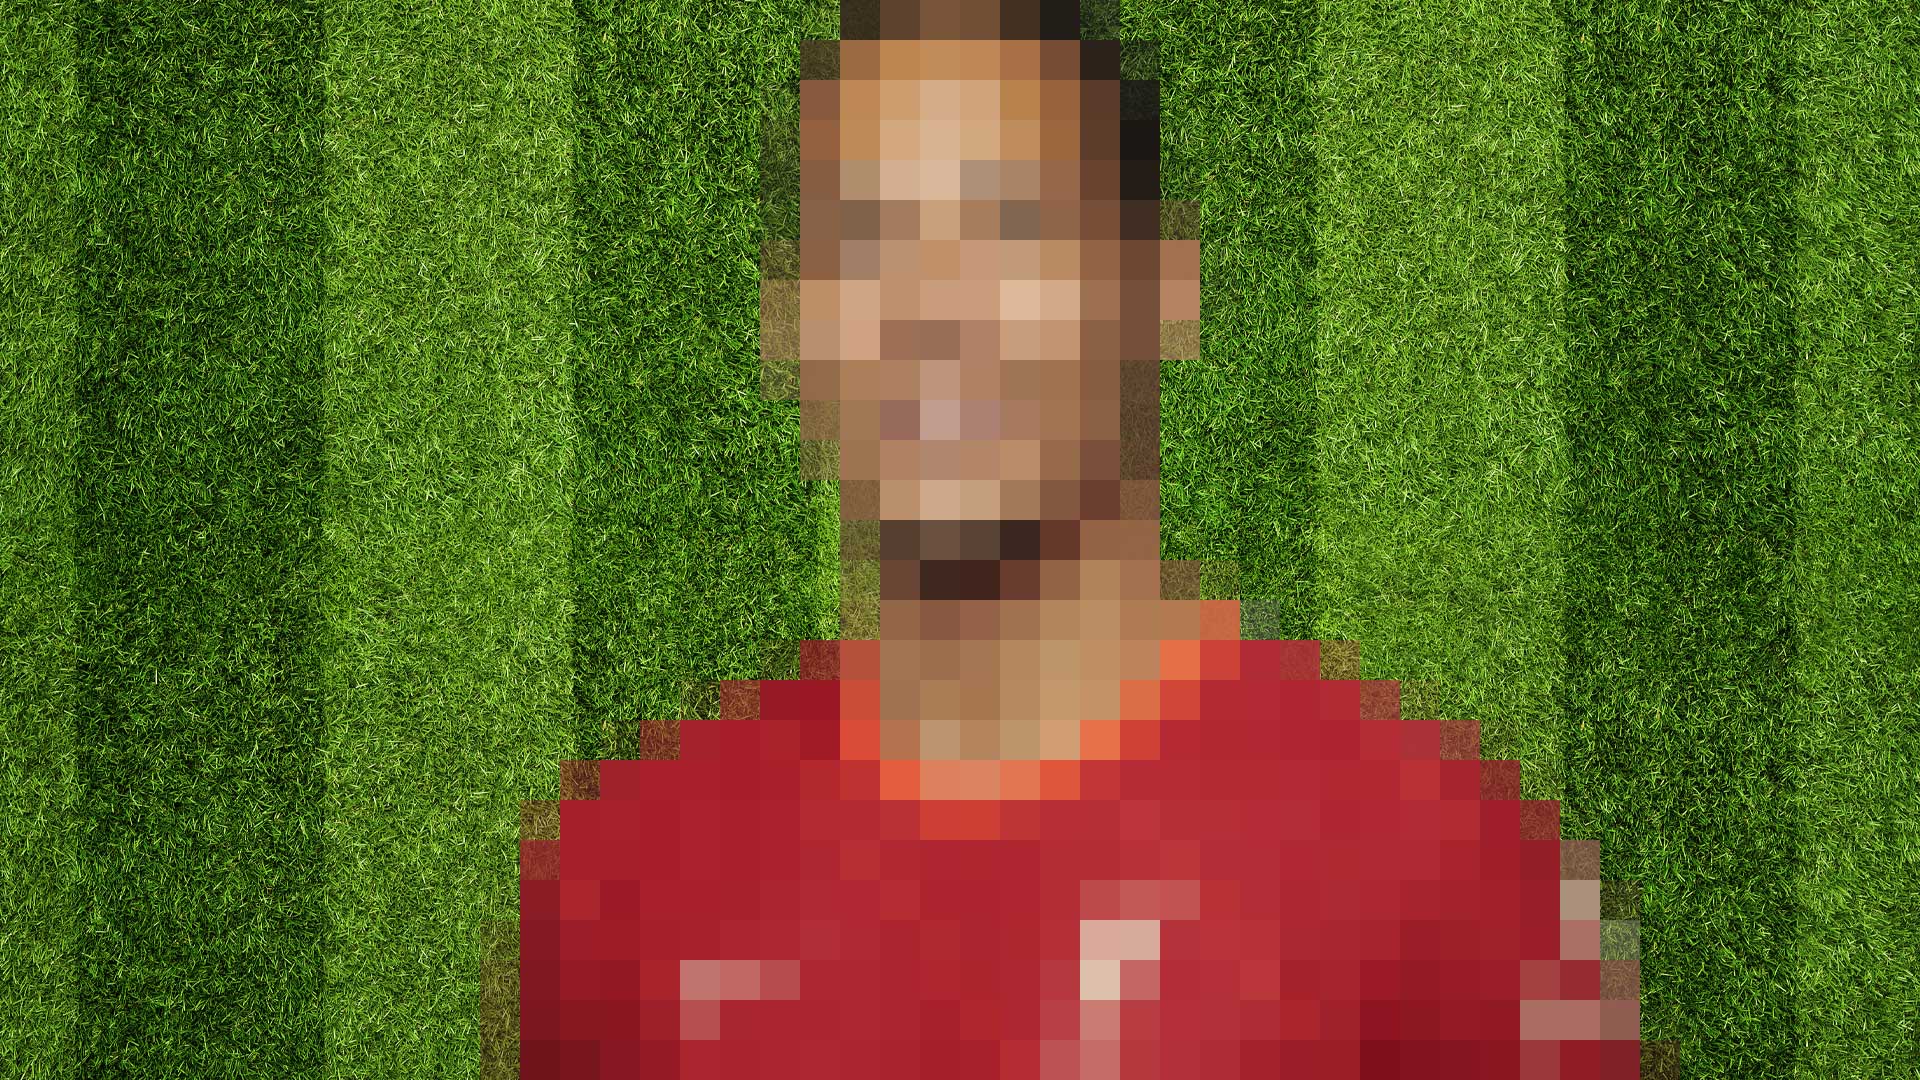 Liverpool blurred player